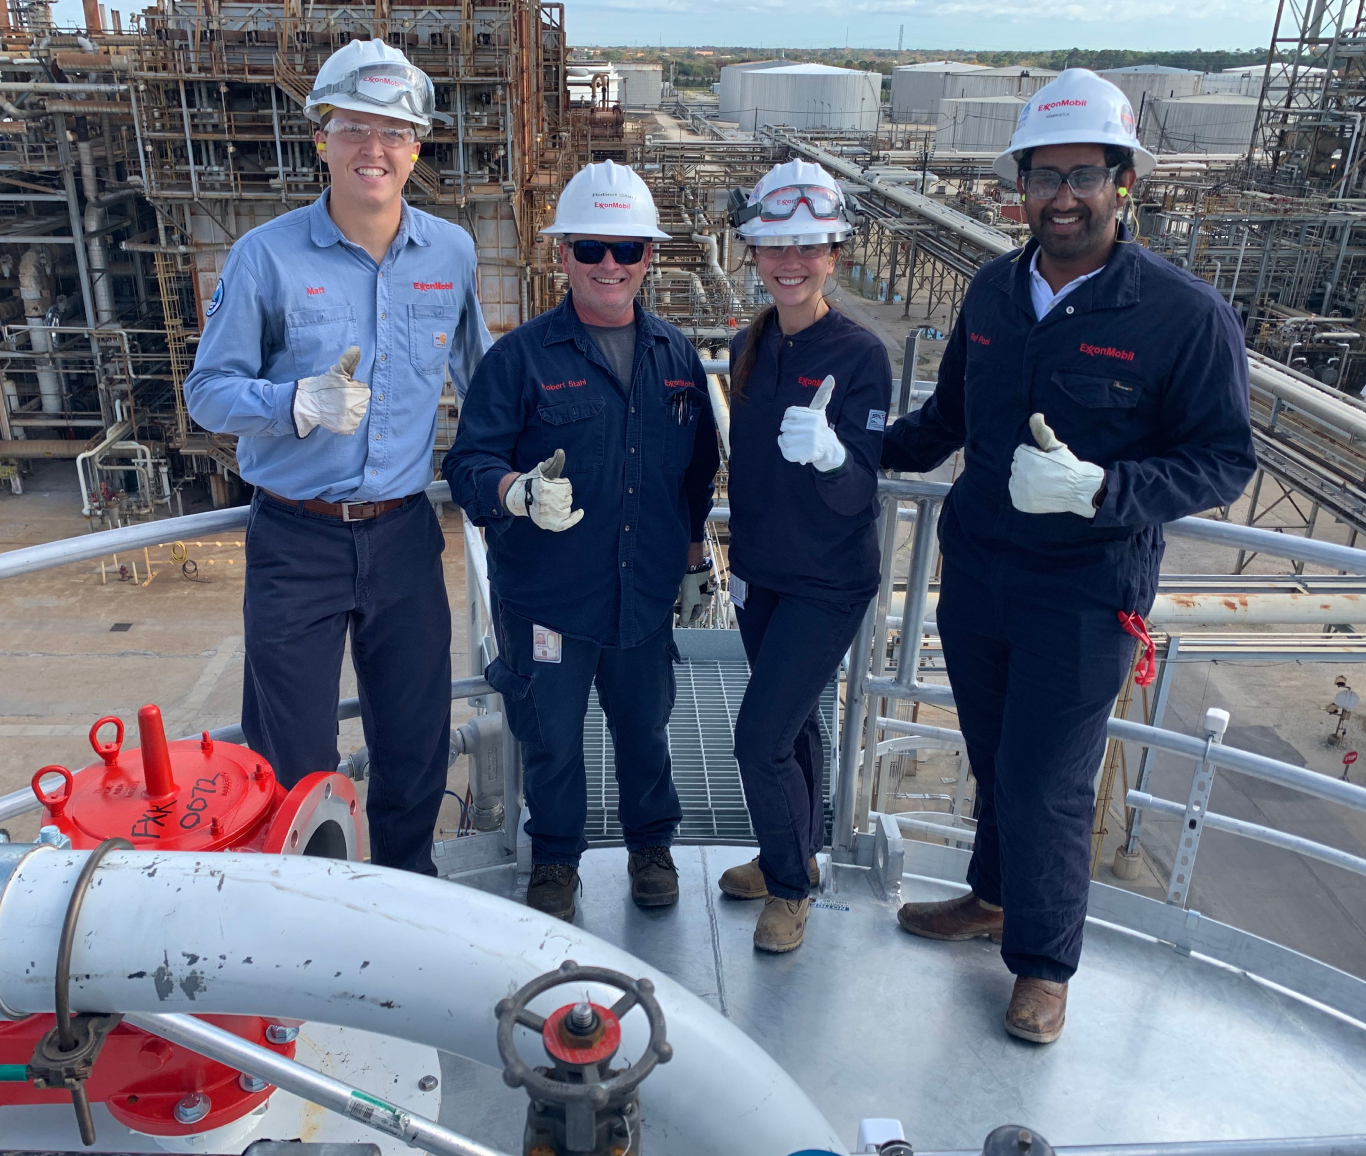 Matthew and colleagues at the Baytown facility